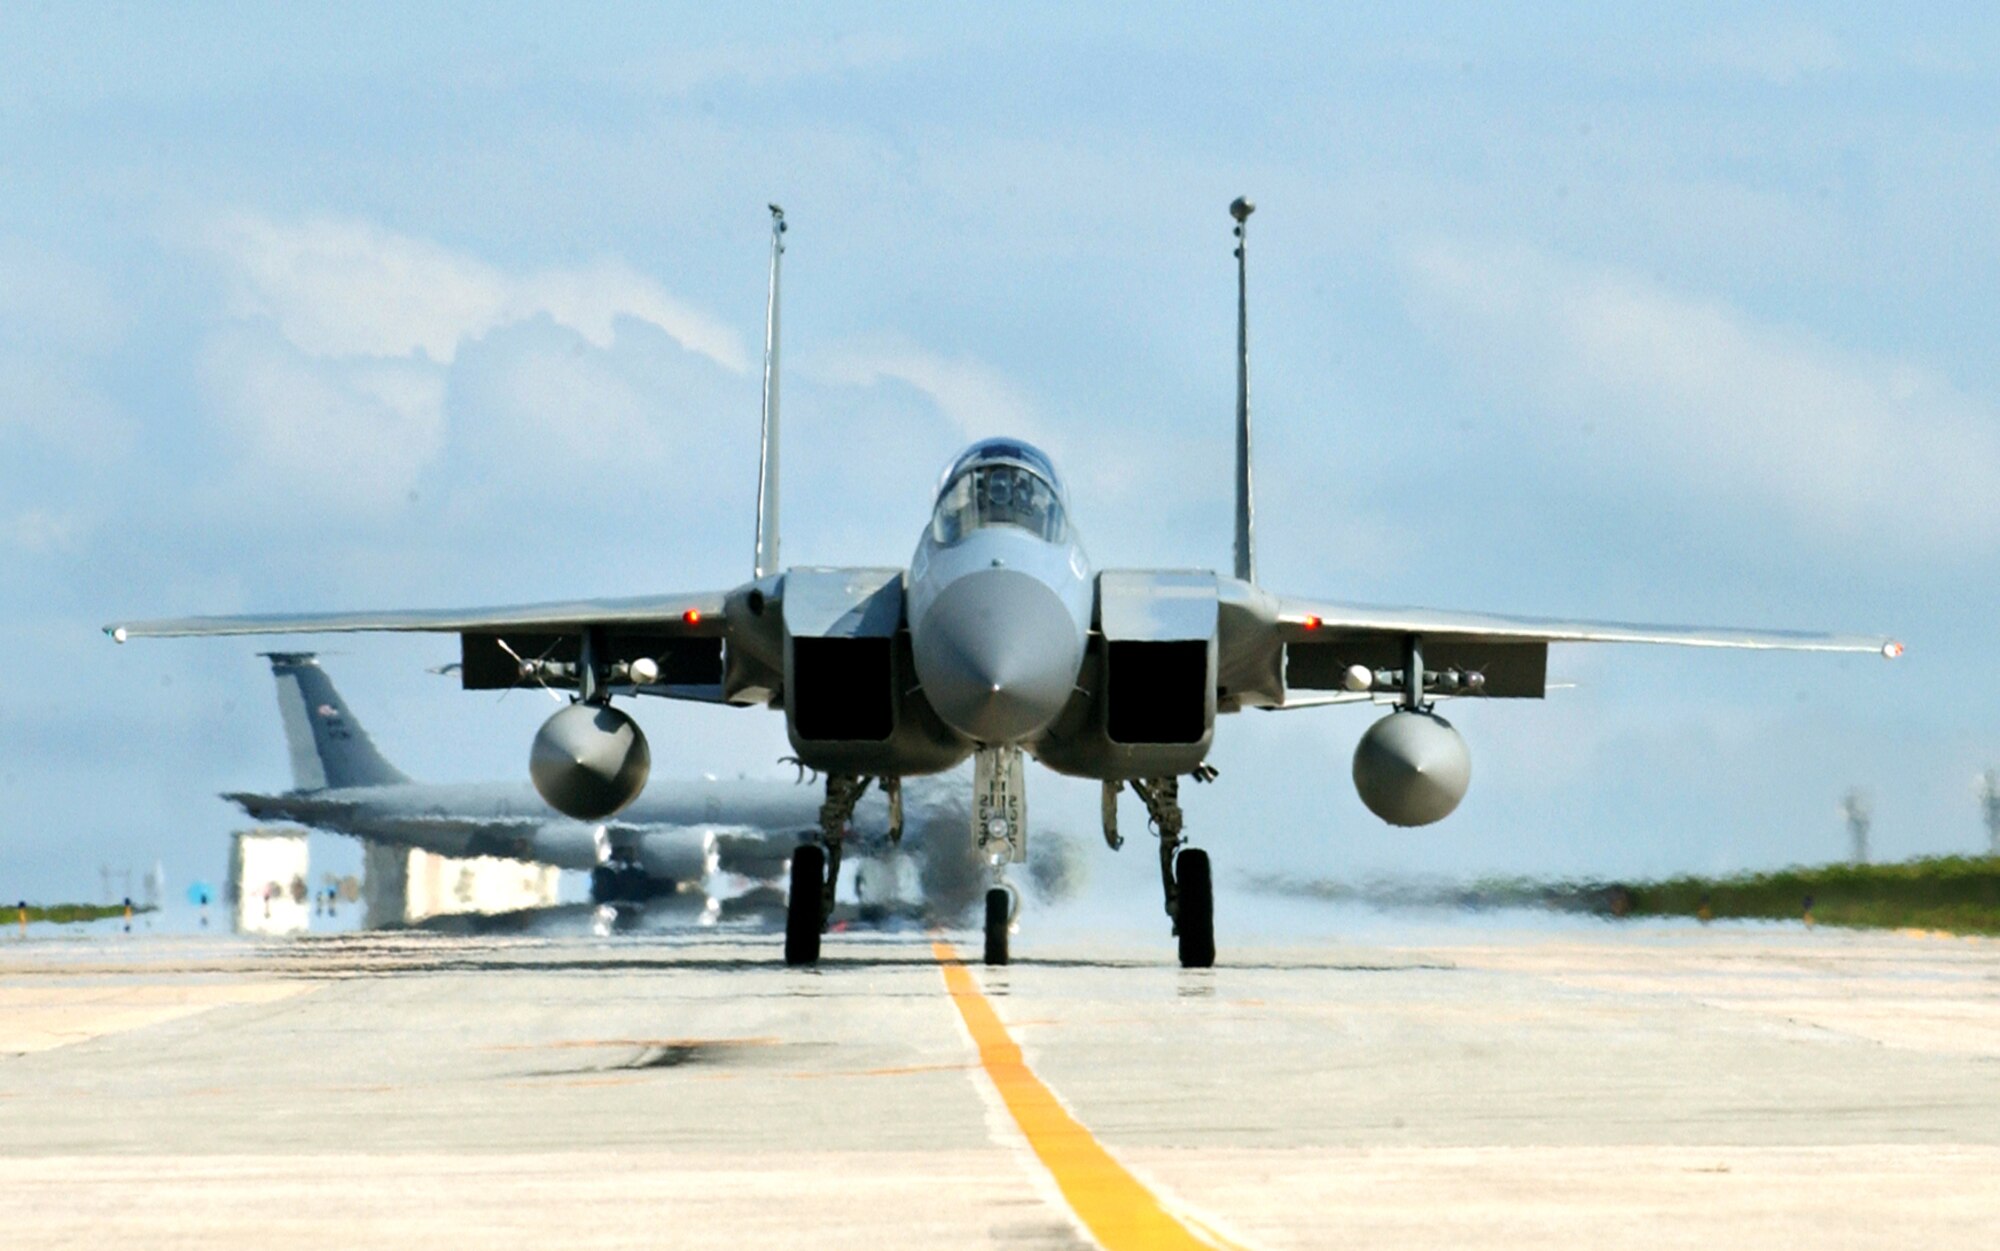 An F-15 Eagle taxis down the runway in preparation to intercept "hostile forces" during local operational readiness exercise Beverly High 08-4 at Kadena Air Base, Japan, Feb. 14, 2008. The 18th Wing conducted the exercise from Feb. 10 to 15 to test Airmen's ability to respond in contingency situations. (U.S. Air Force photo/Senior Airman Jeremy McGuffin)